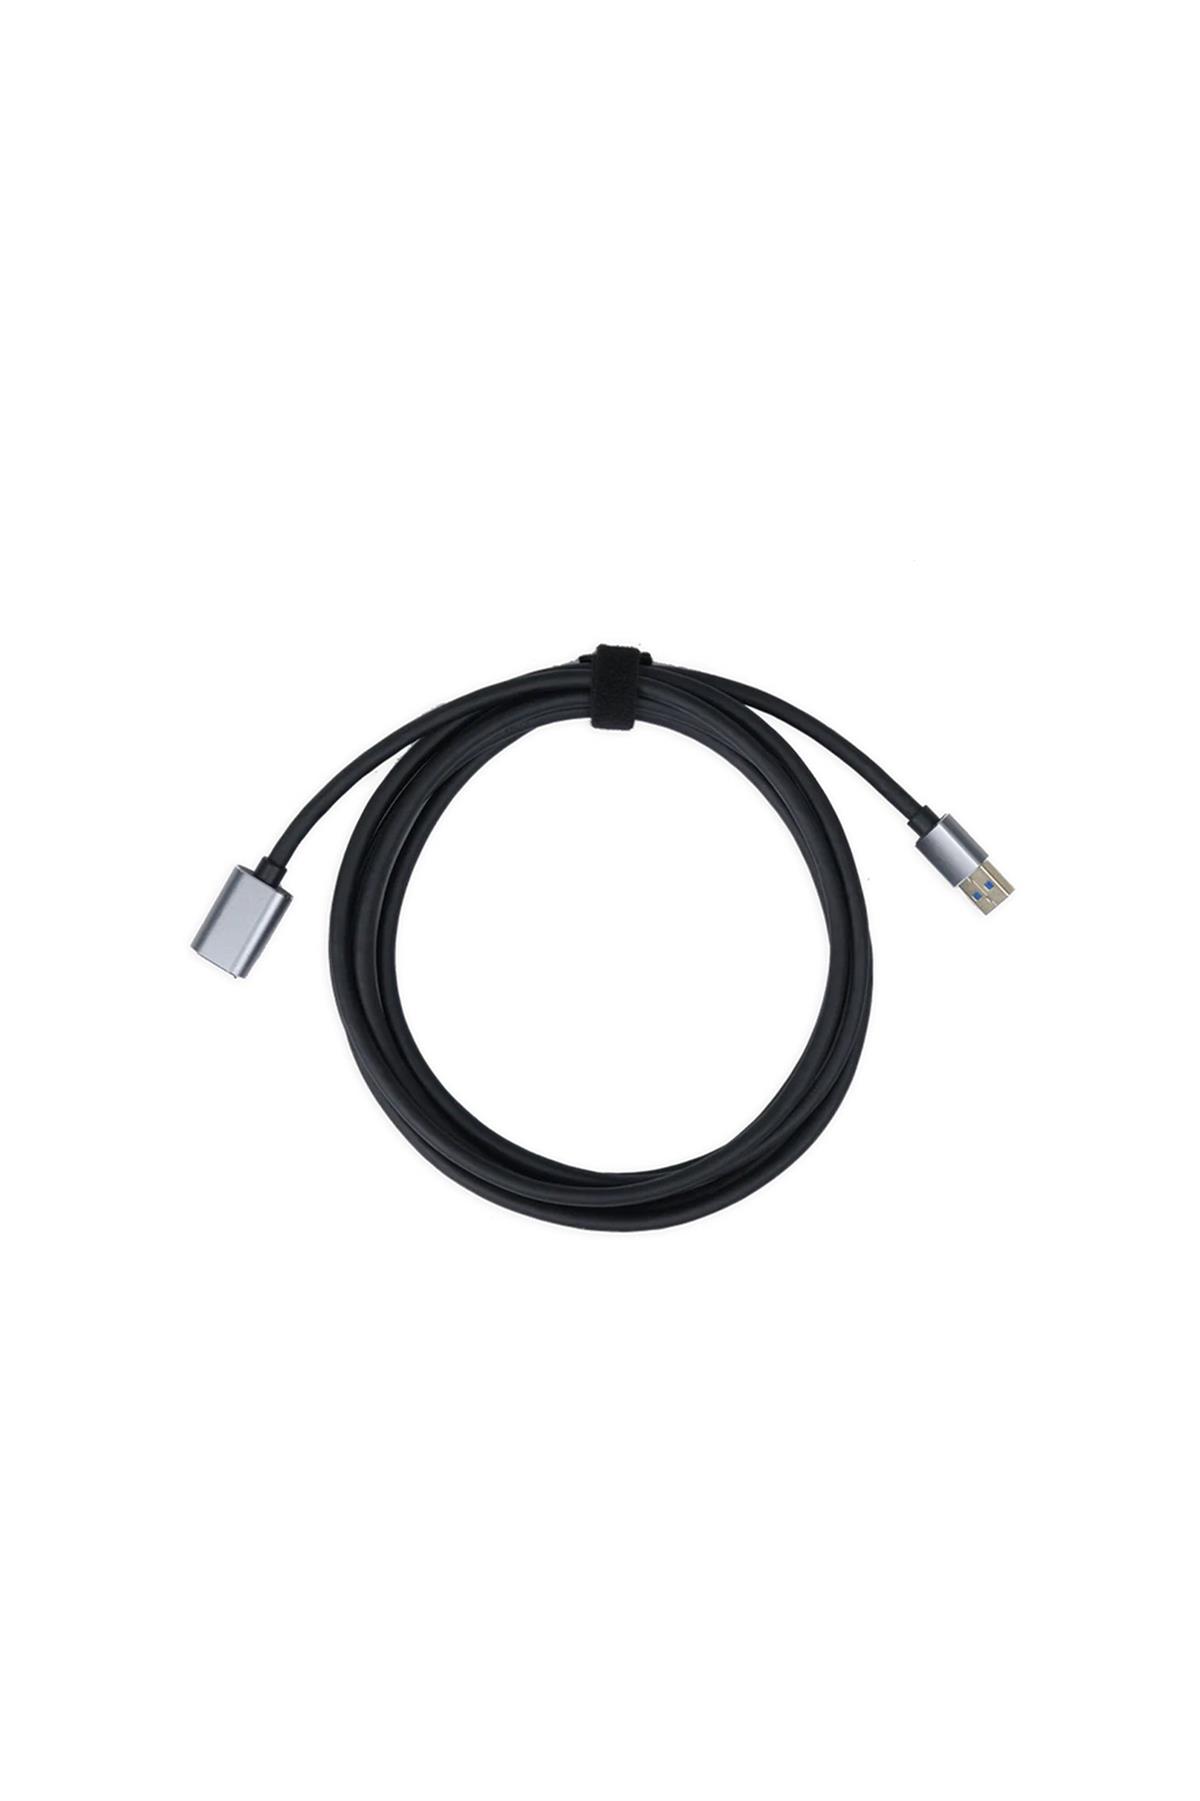 Revopoint USB 3.0 Extension Cable